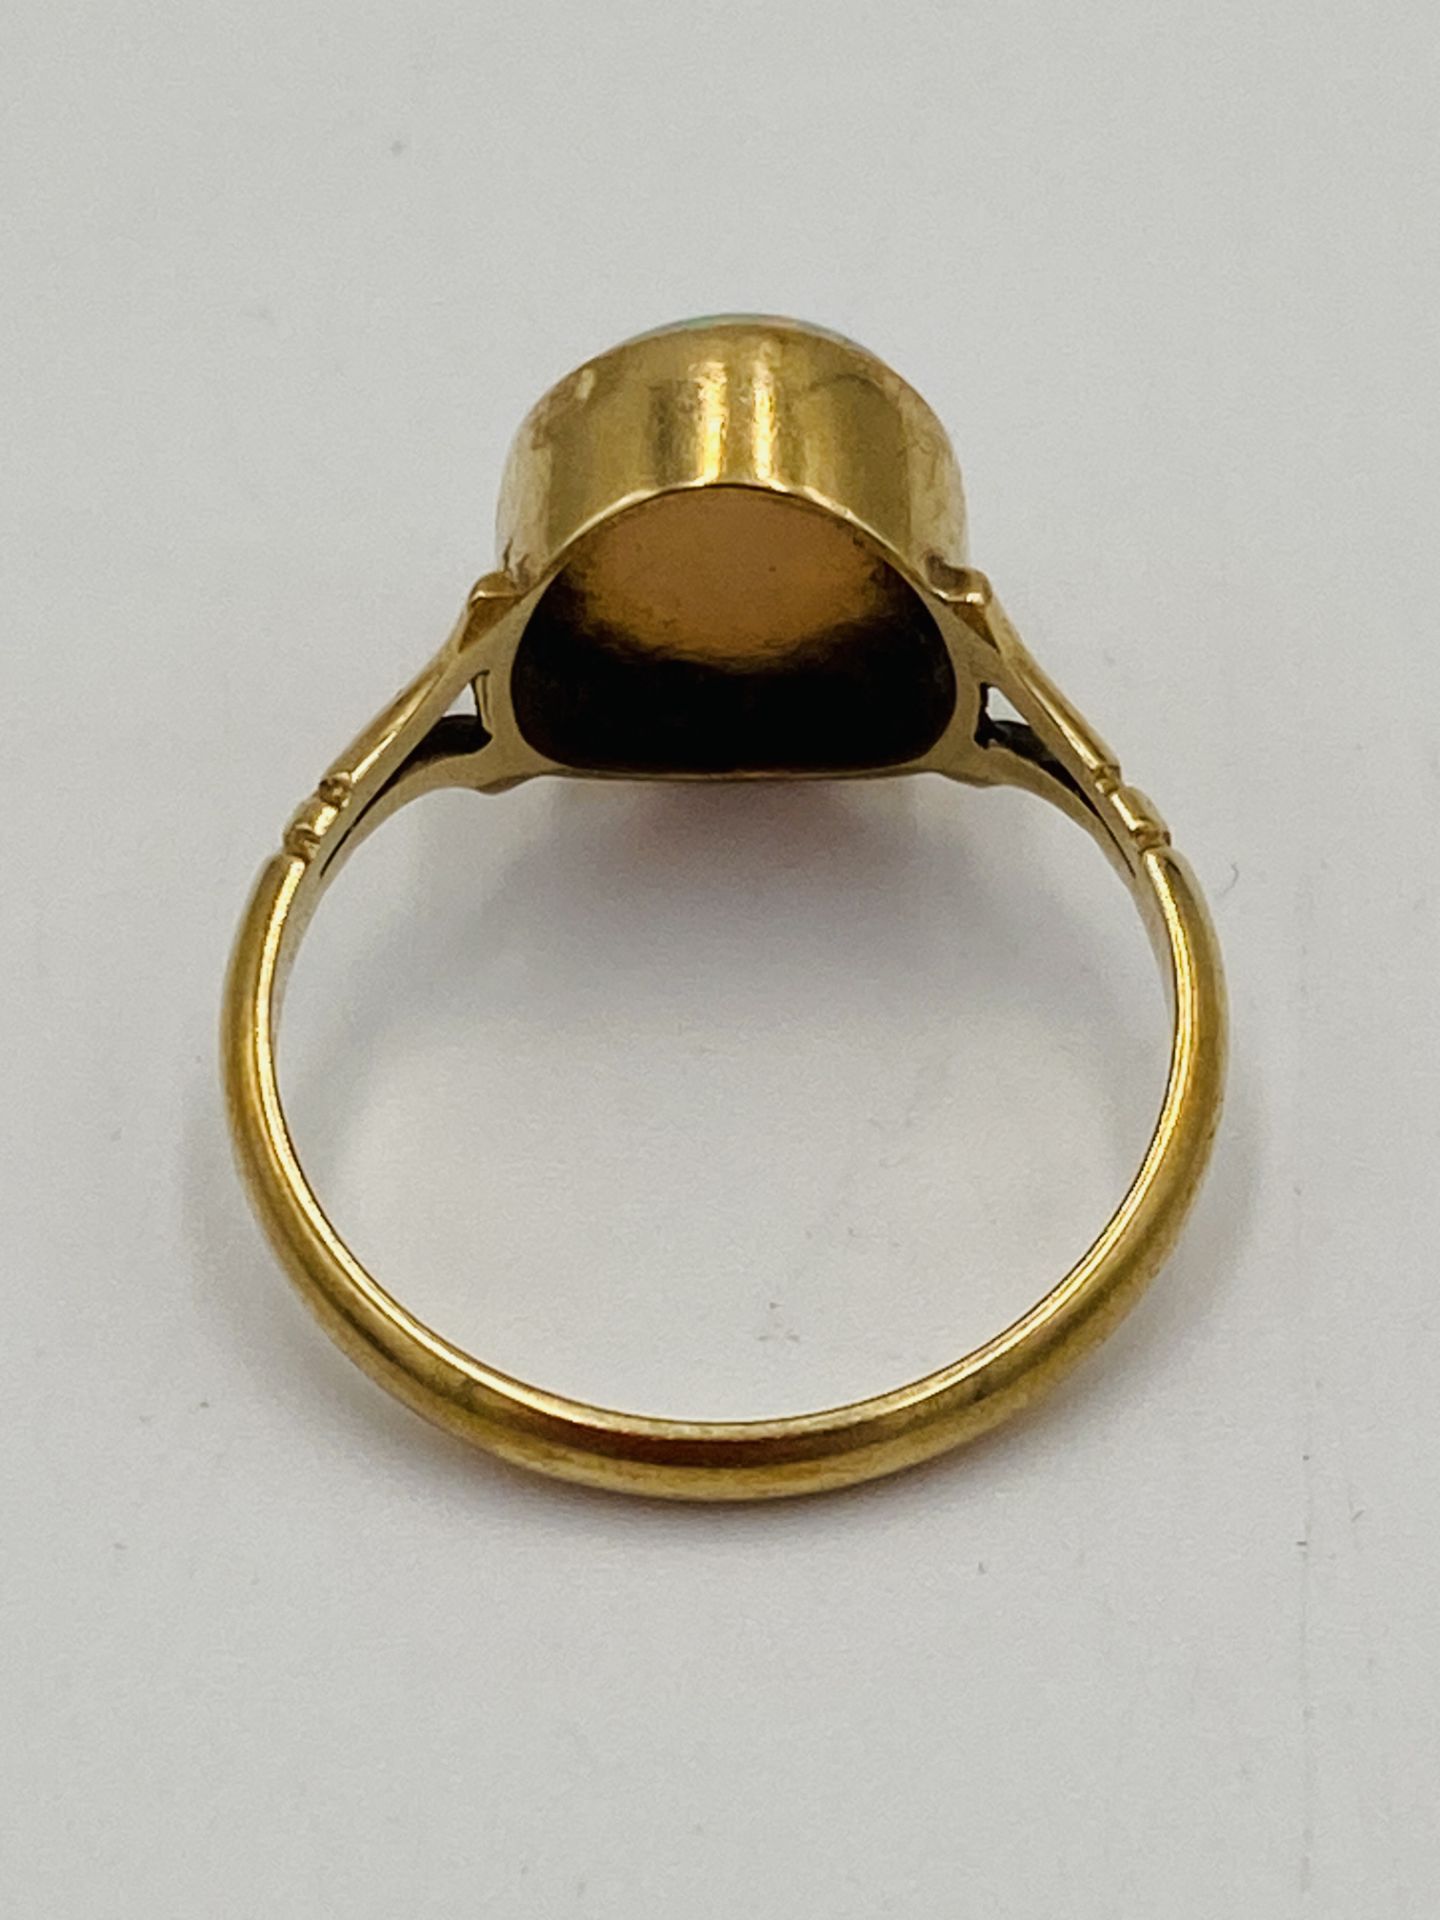 9ct gold ring set with a pale opal - Image 4 of 6